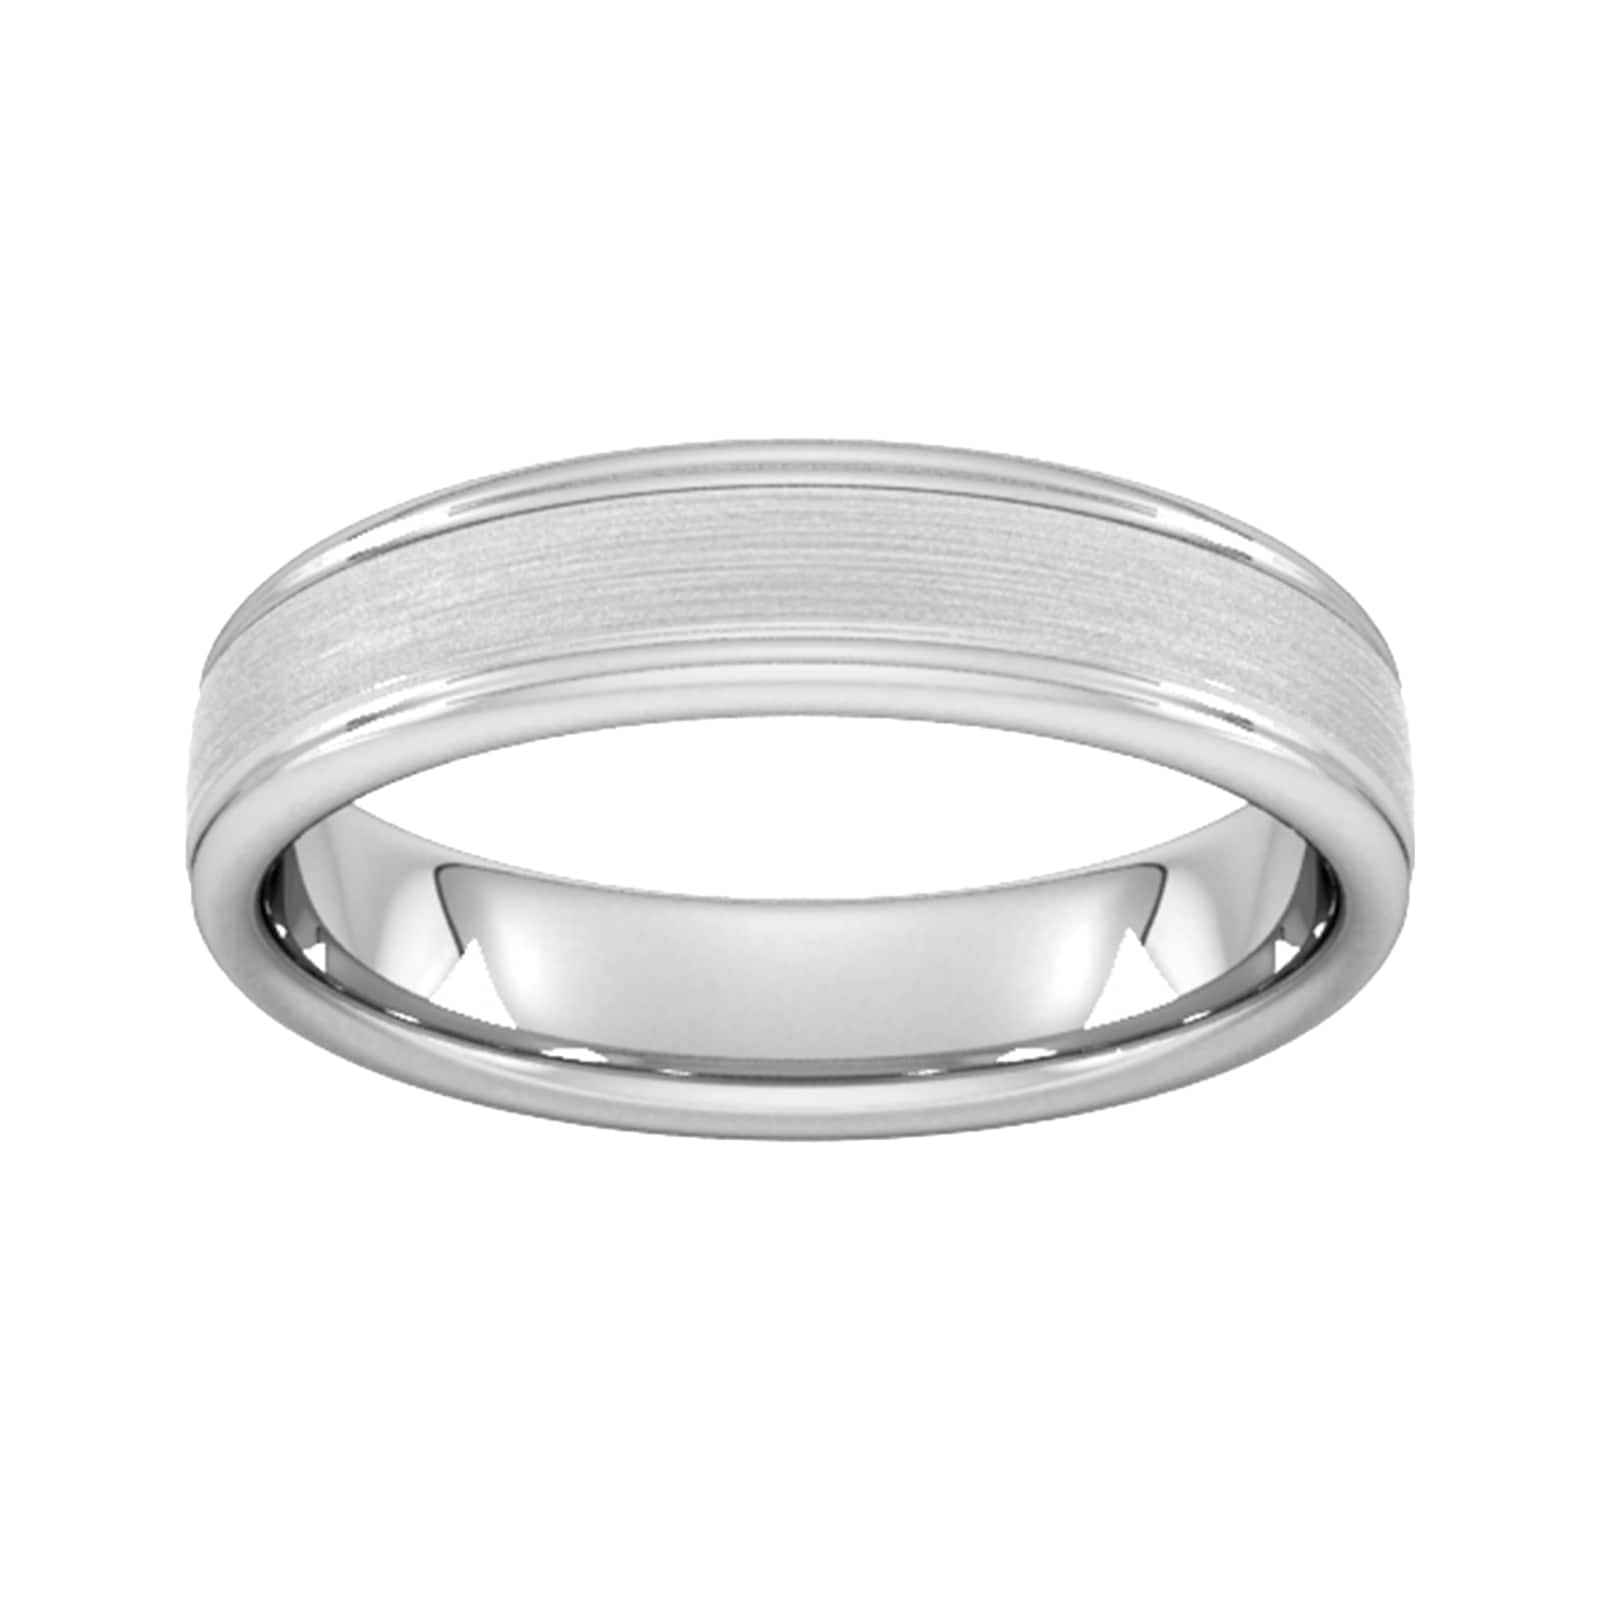 5mm Traditional Court Standard Matt Centre With Grooves Wedding Ring In 950 Palladium - Ring Size O